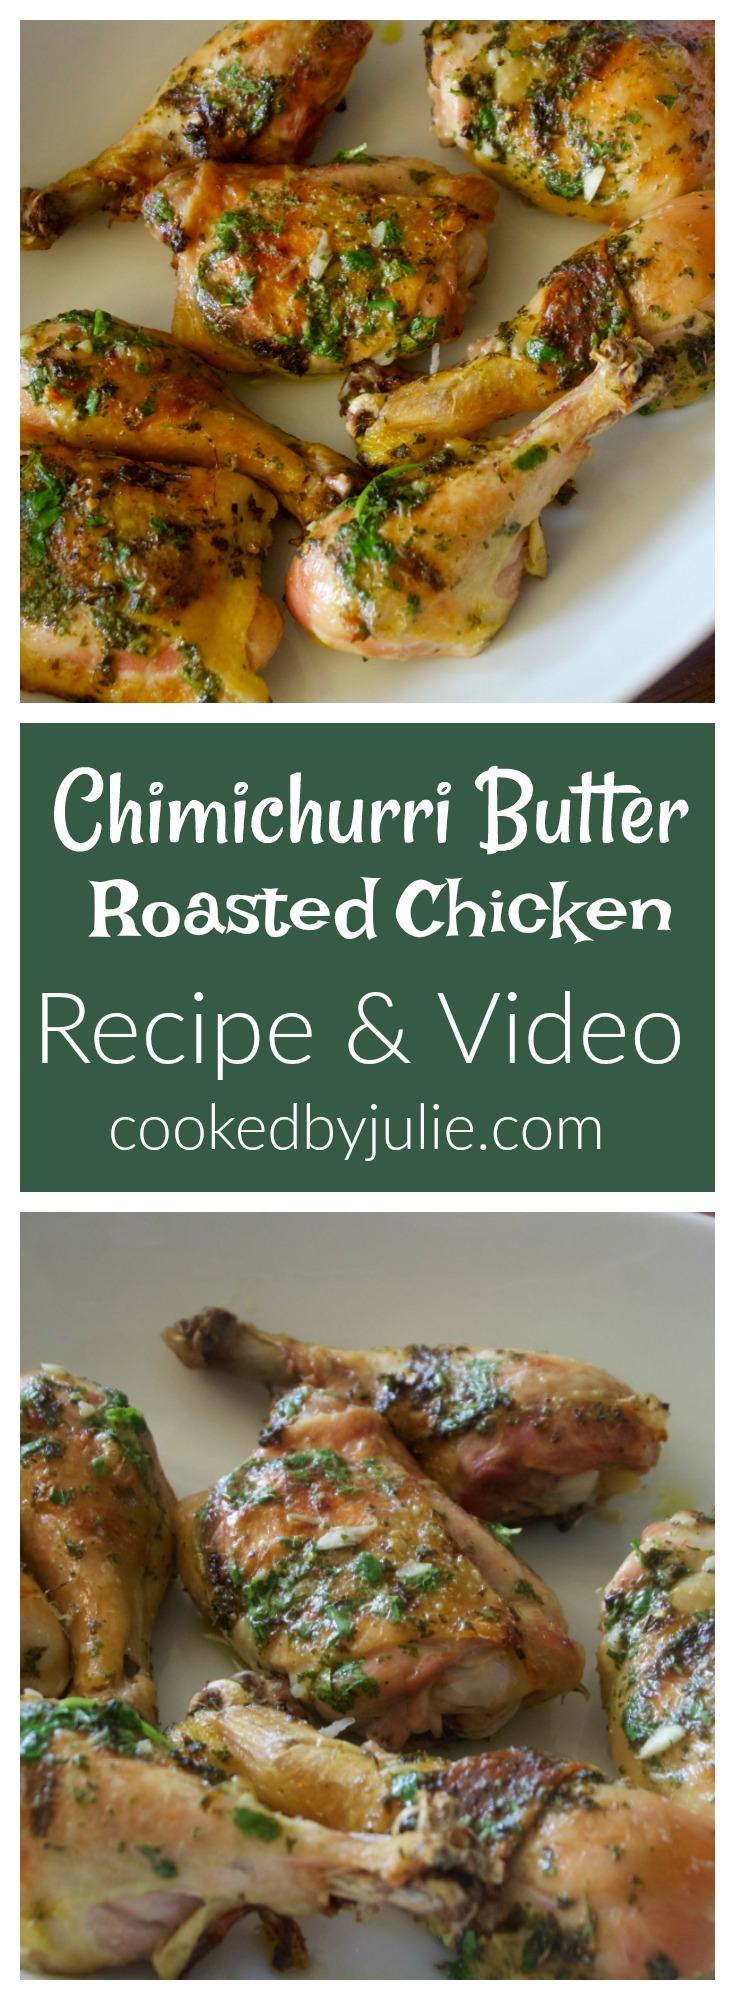 Chimichurri butter roasted chicken recipe with video.